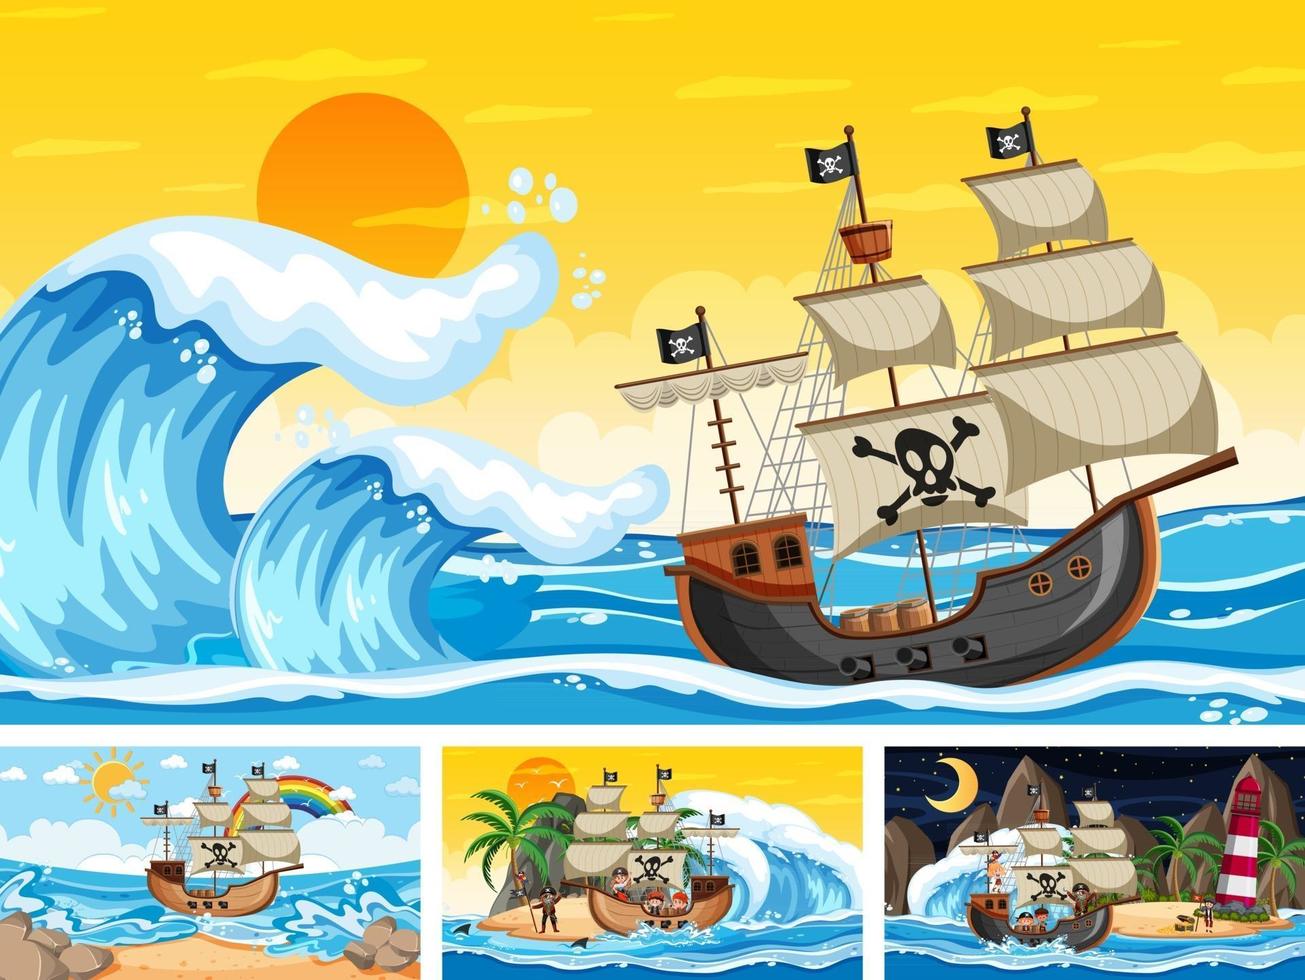 Set of different beach scenes with pirate ship and pirate cartoon character vector